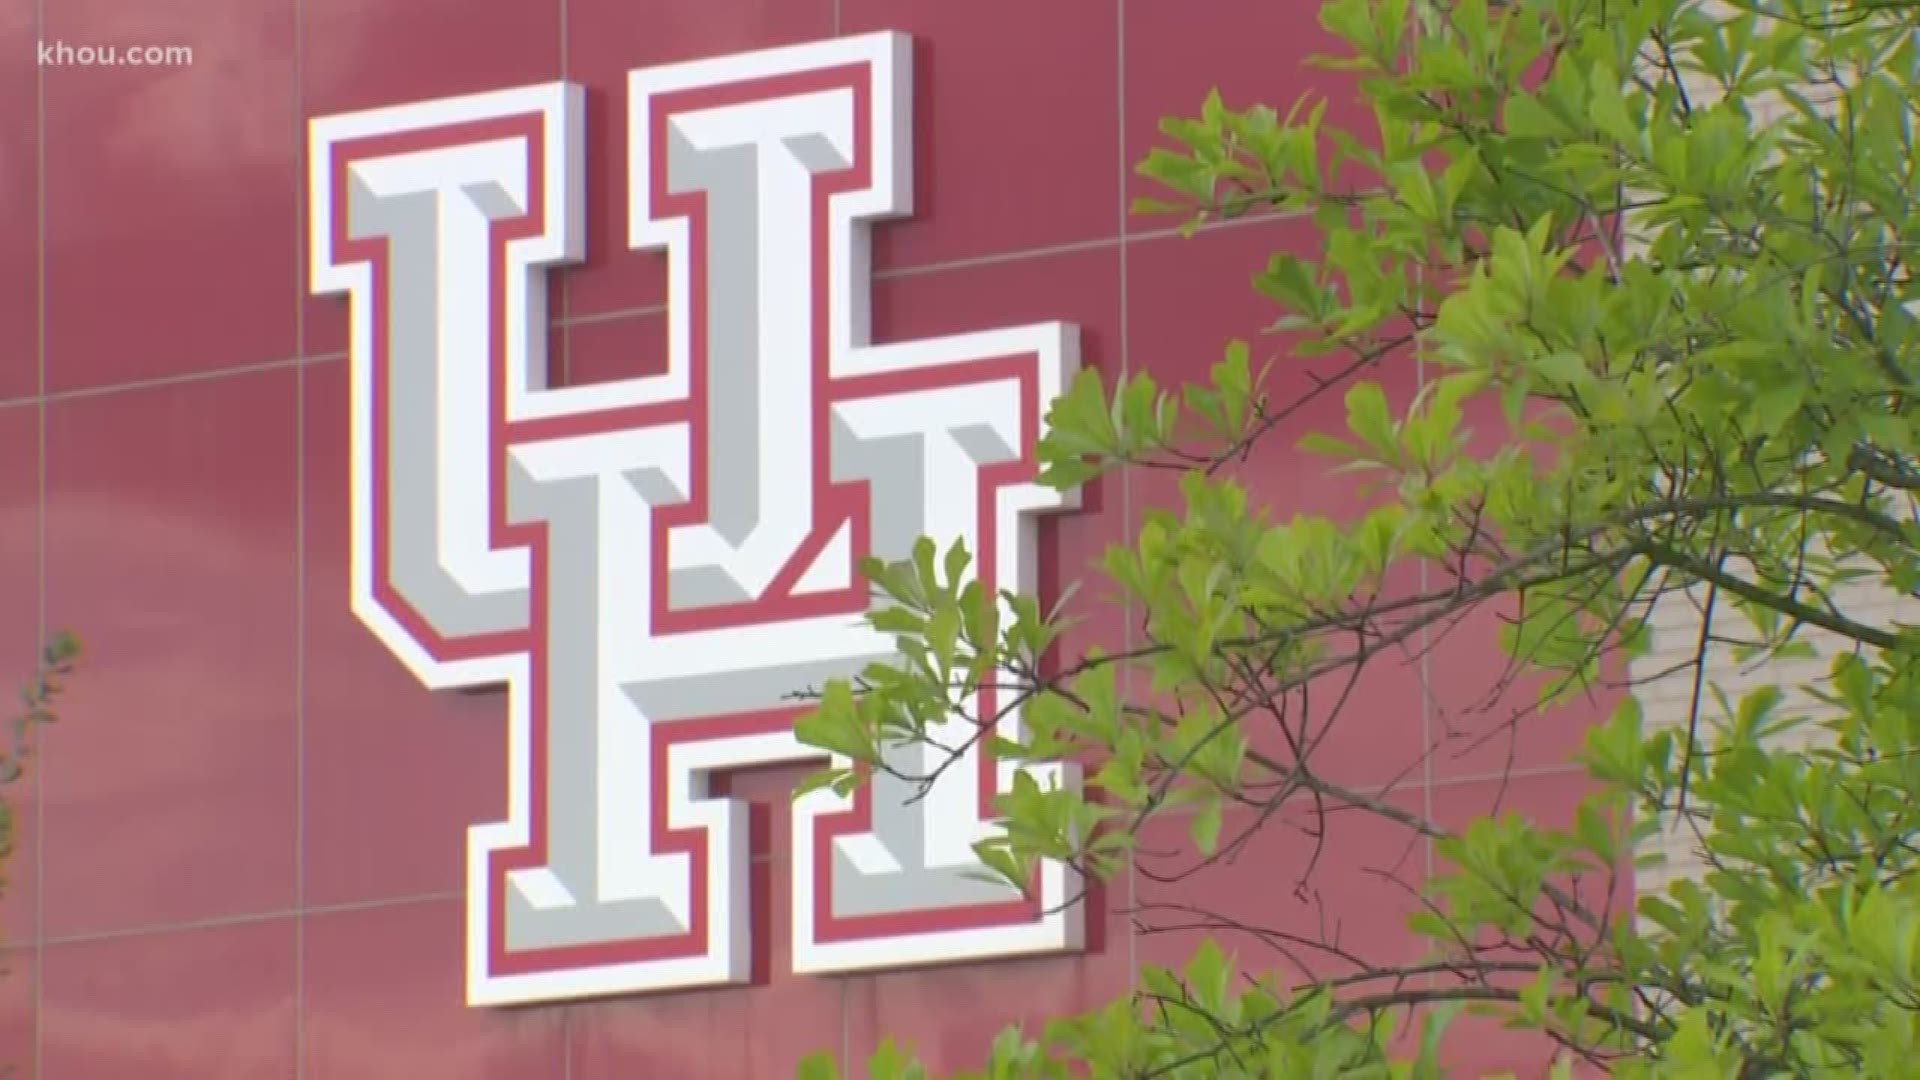 UH issued a notice Wednesday to faculty, staff and students expressing the fact that it wants to be vigilant to contain and prevent the spread of coronavirus.